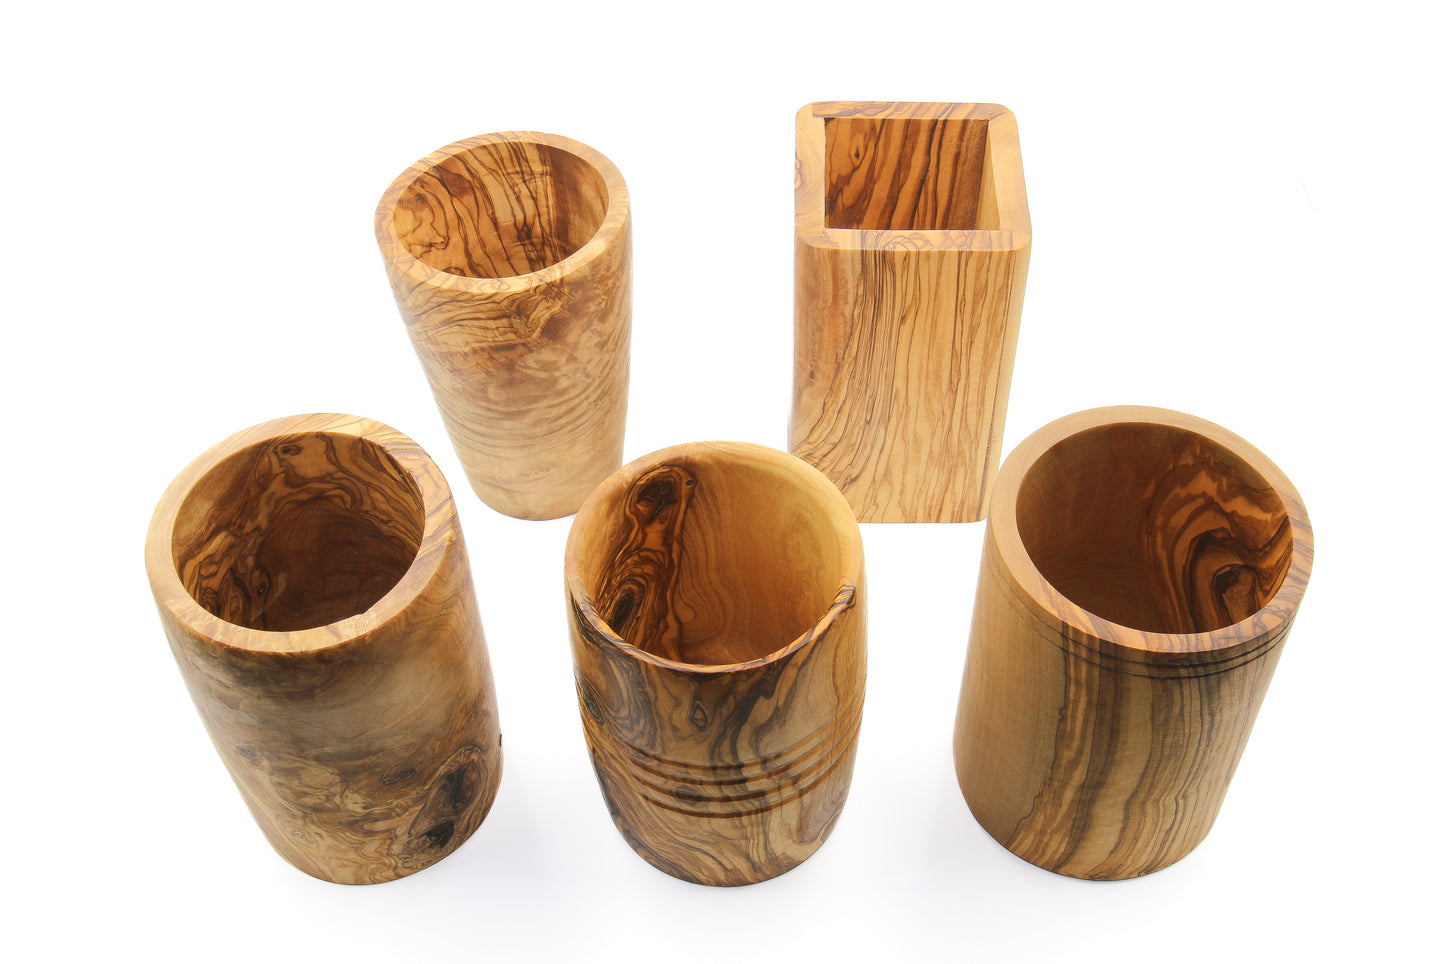 Rustic utensil holder crafted from beautiful olive wood